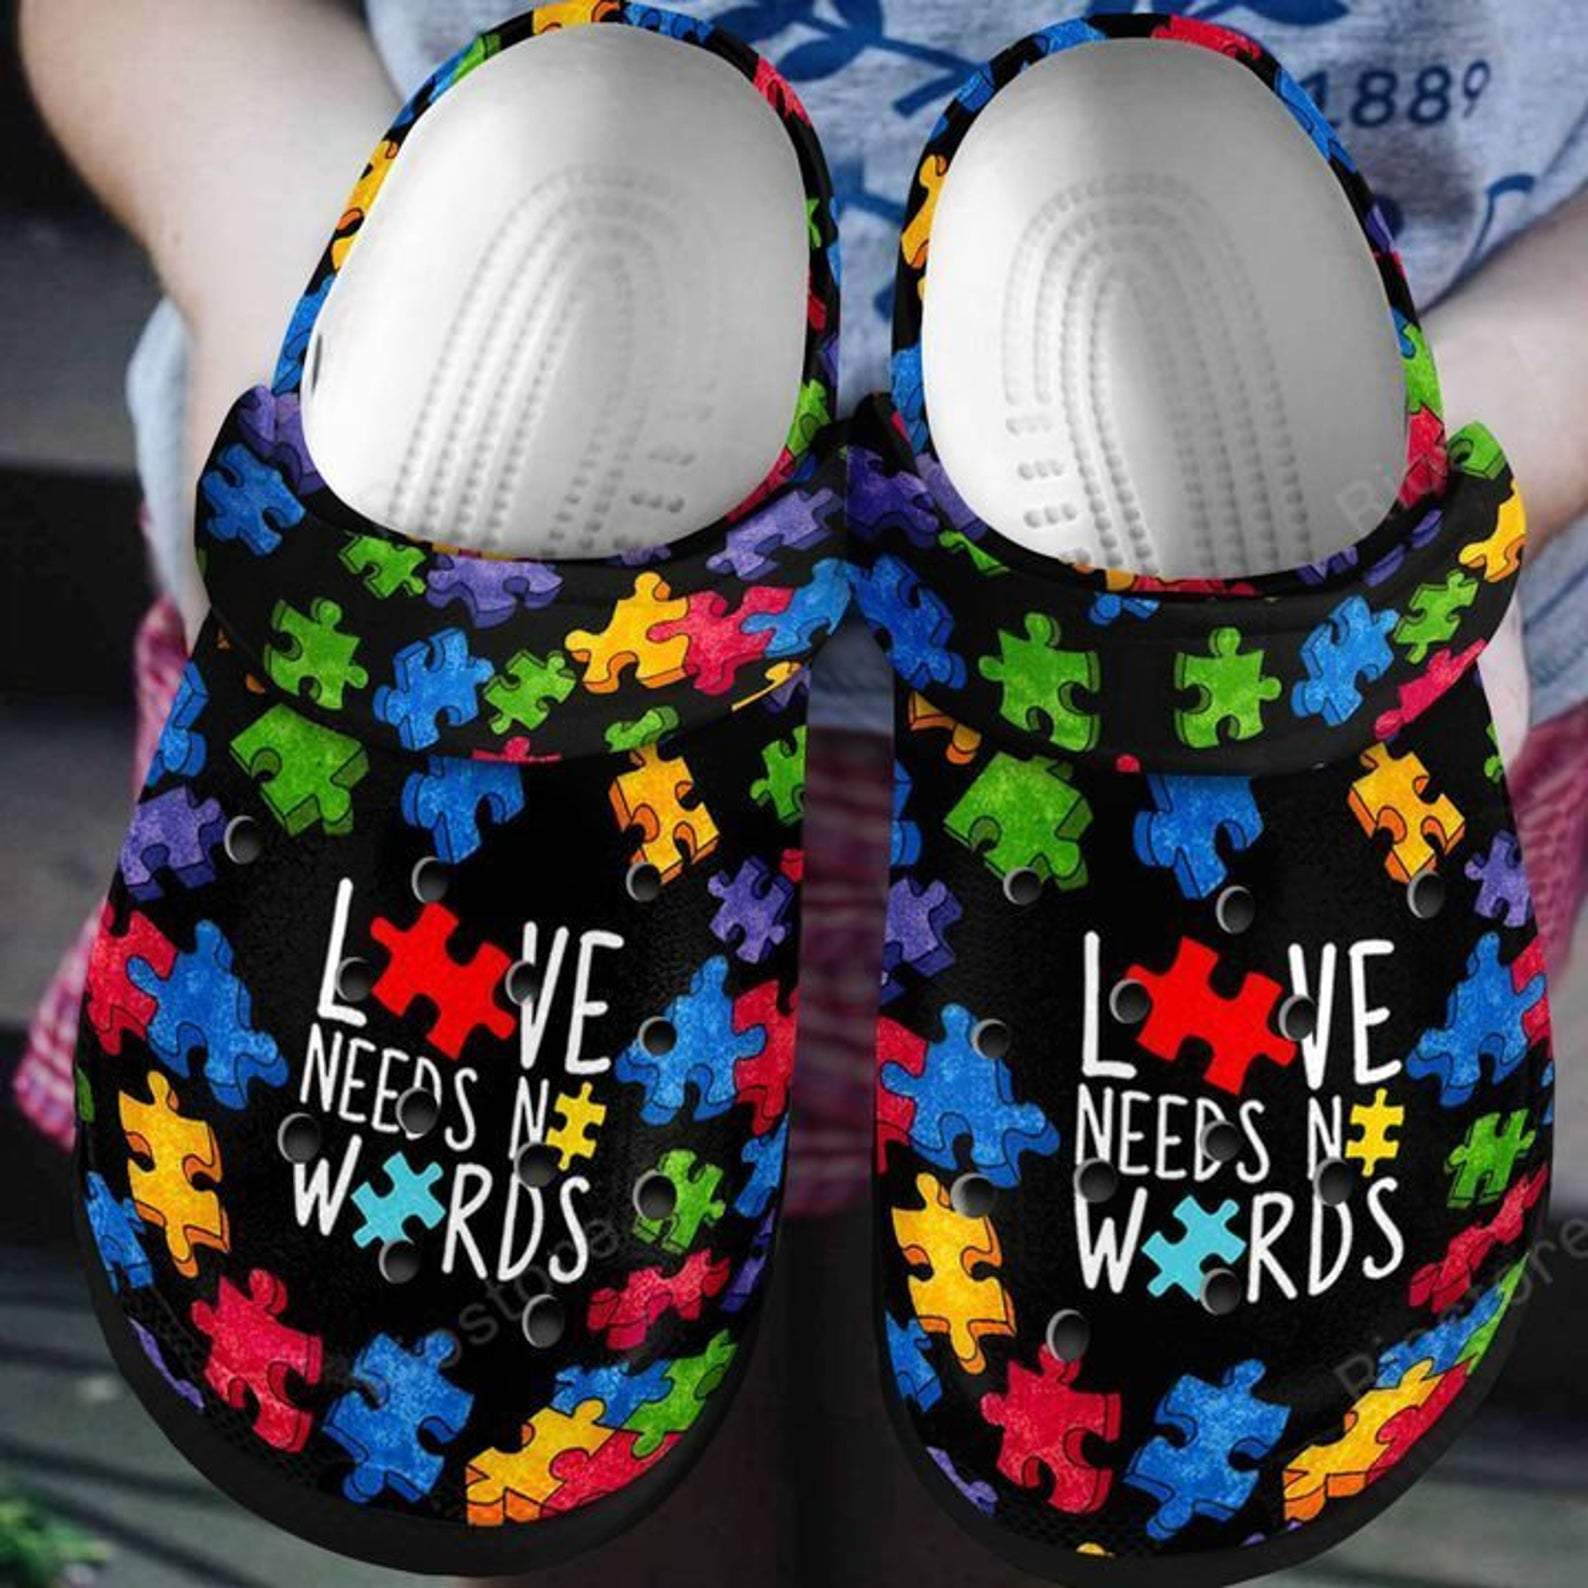 Love Need No Words Puzzle Crocs Shoes - Autism Awareness Shoes Crocbland Clog Gifts For Boy Girl